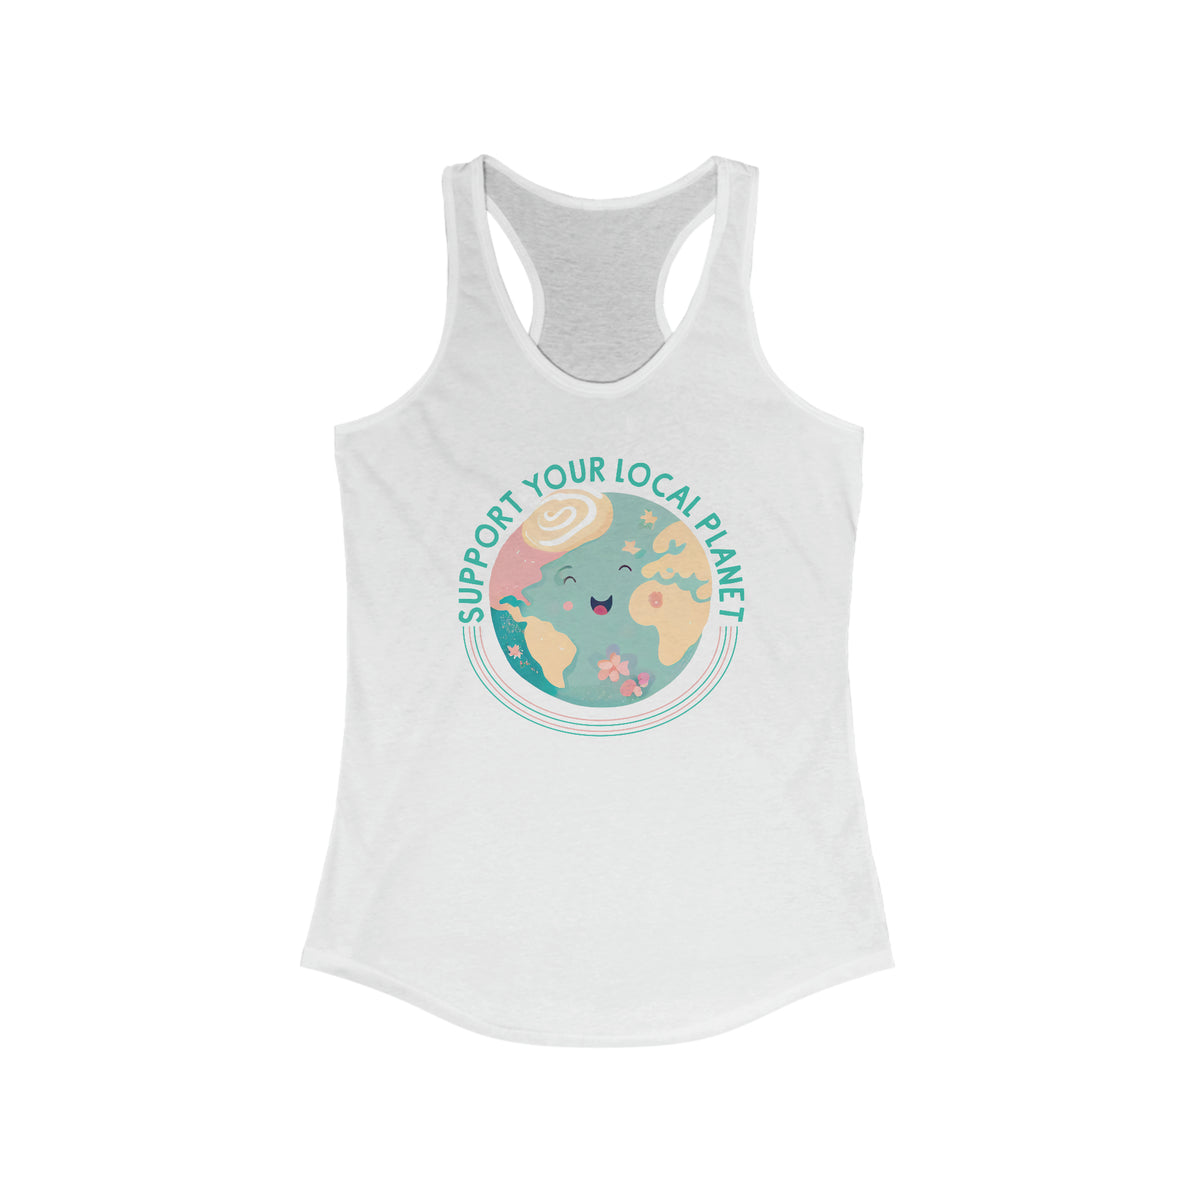 Support Your Local Planet Earth Day Shirt | Kawaii Style shirt | Nature Shirt | Gift For Her | Women's Slim Fit Racerback Tank Top